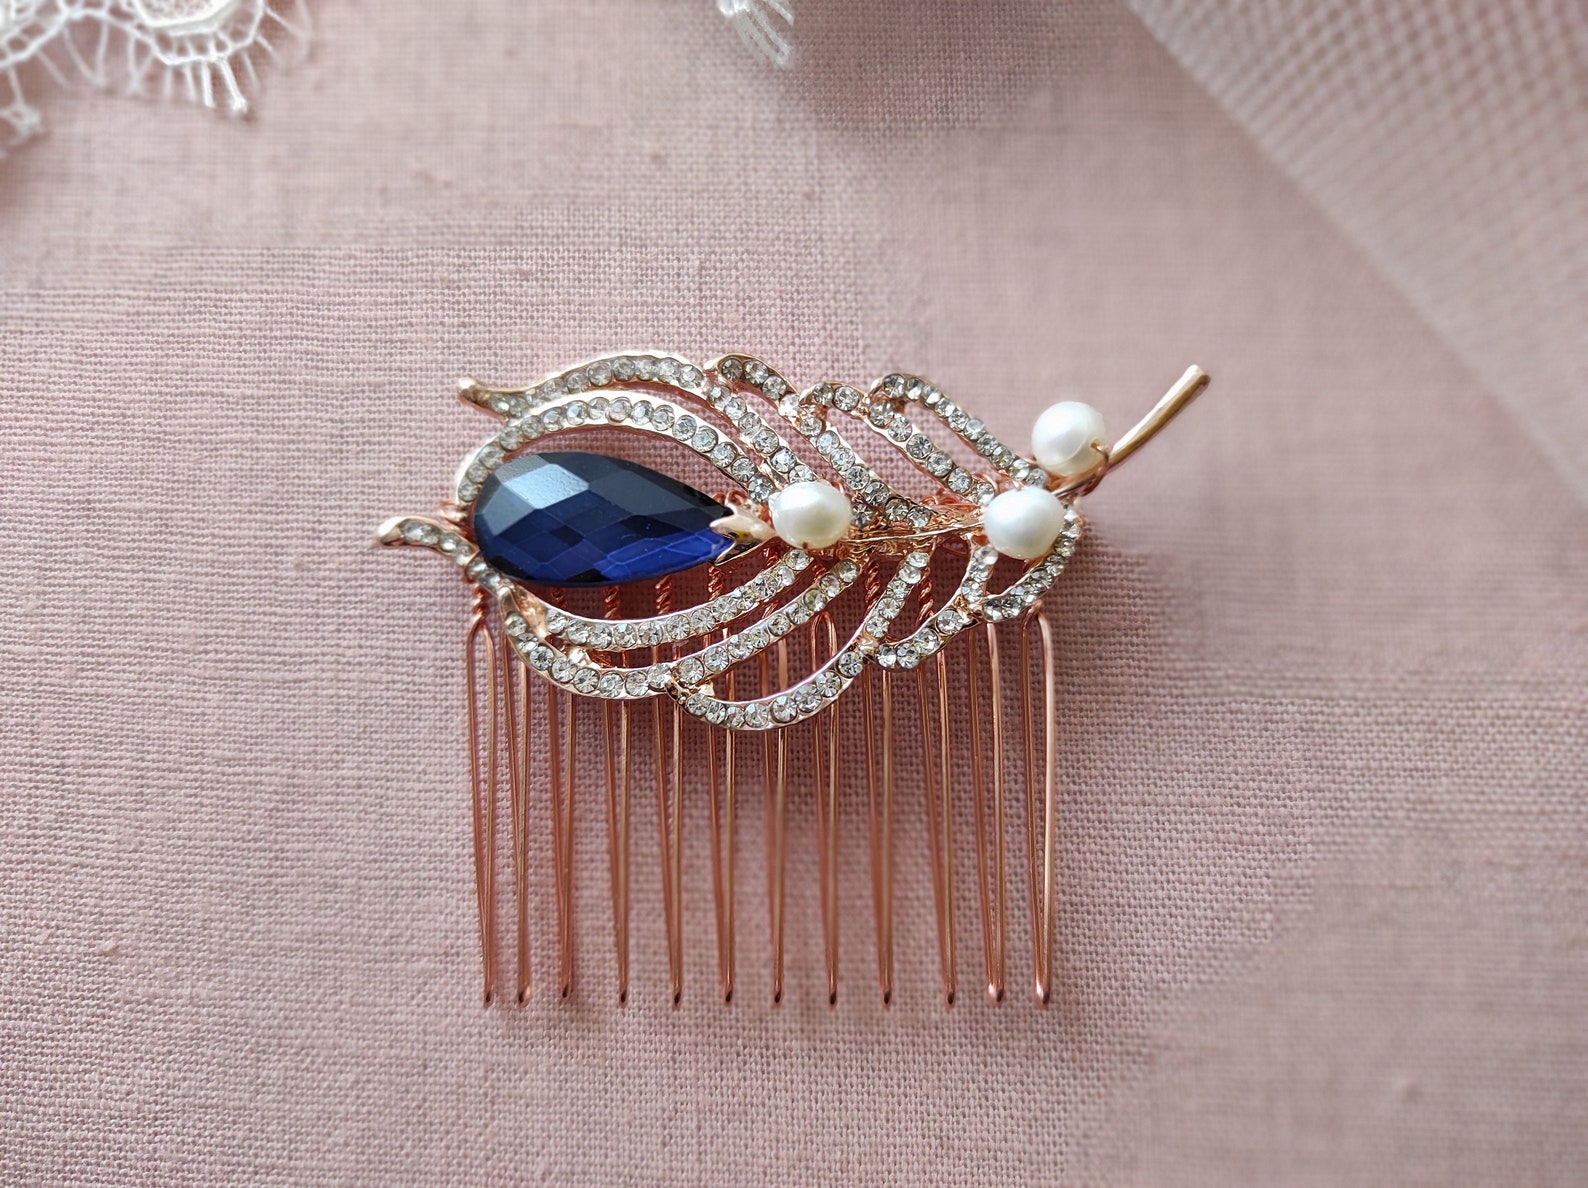 1. Rose Gold and Blue Hair Comb by Lulu Splendor - wide 7